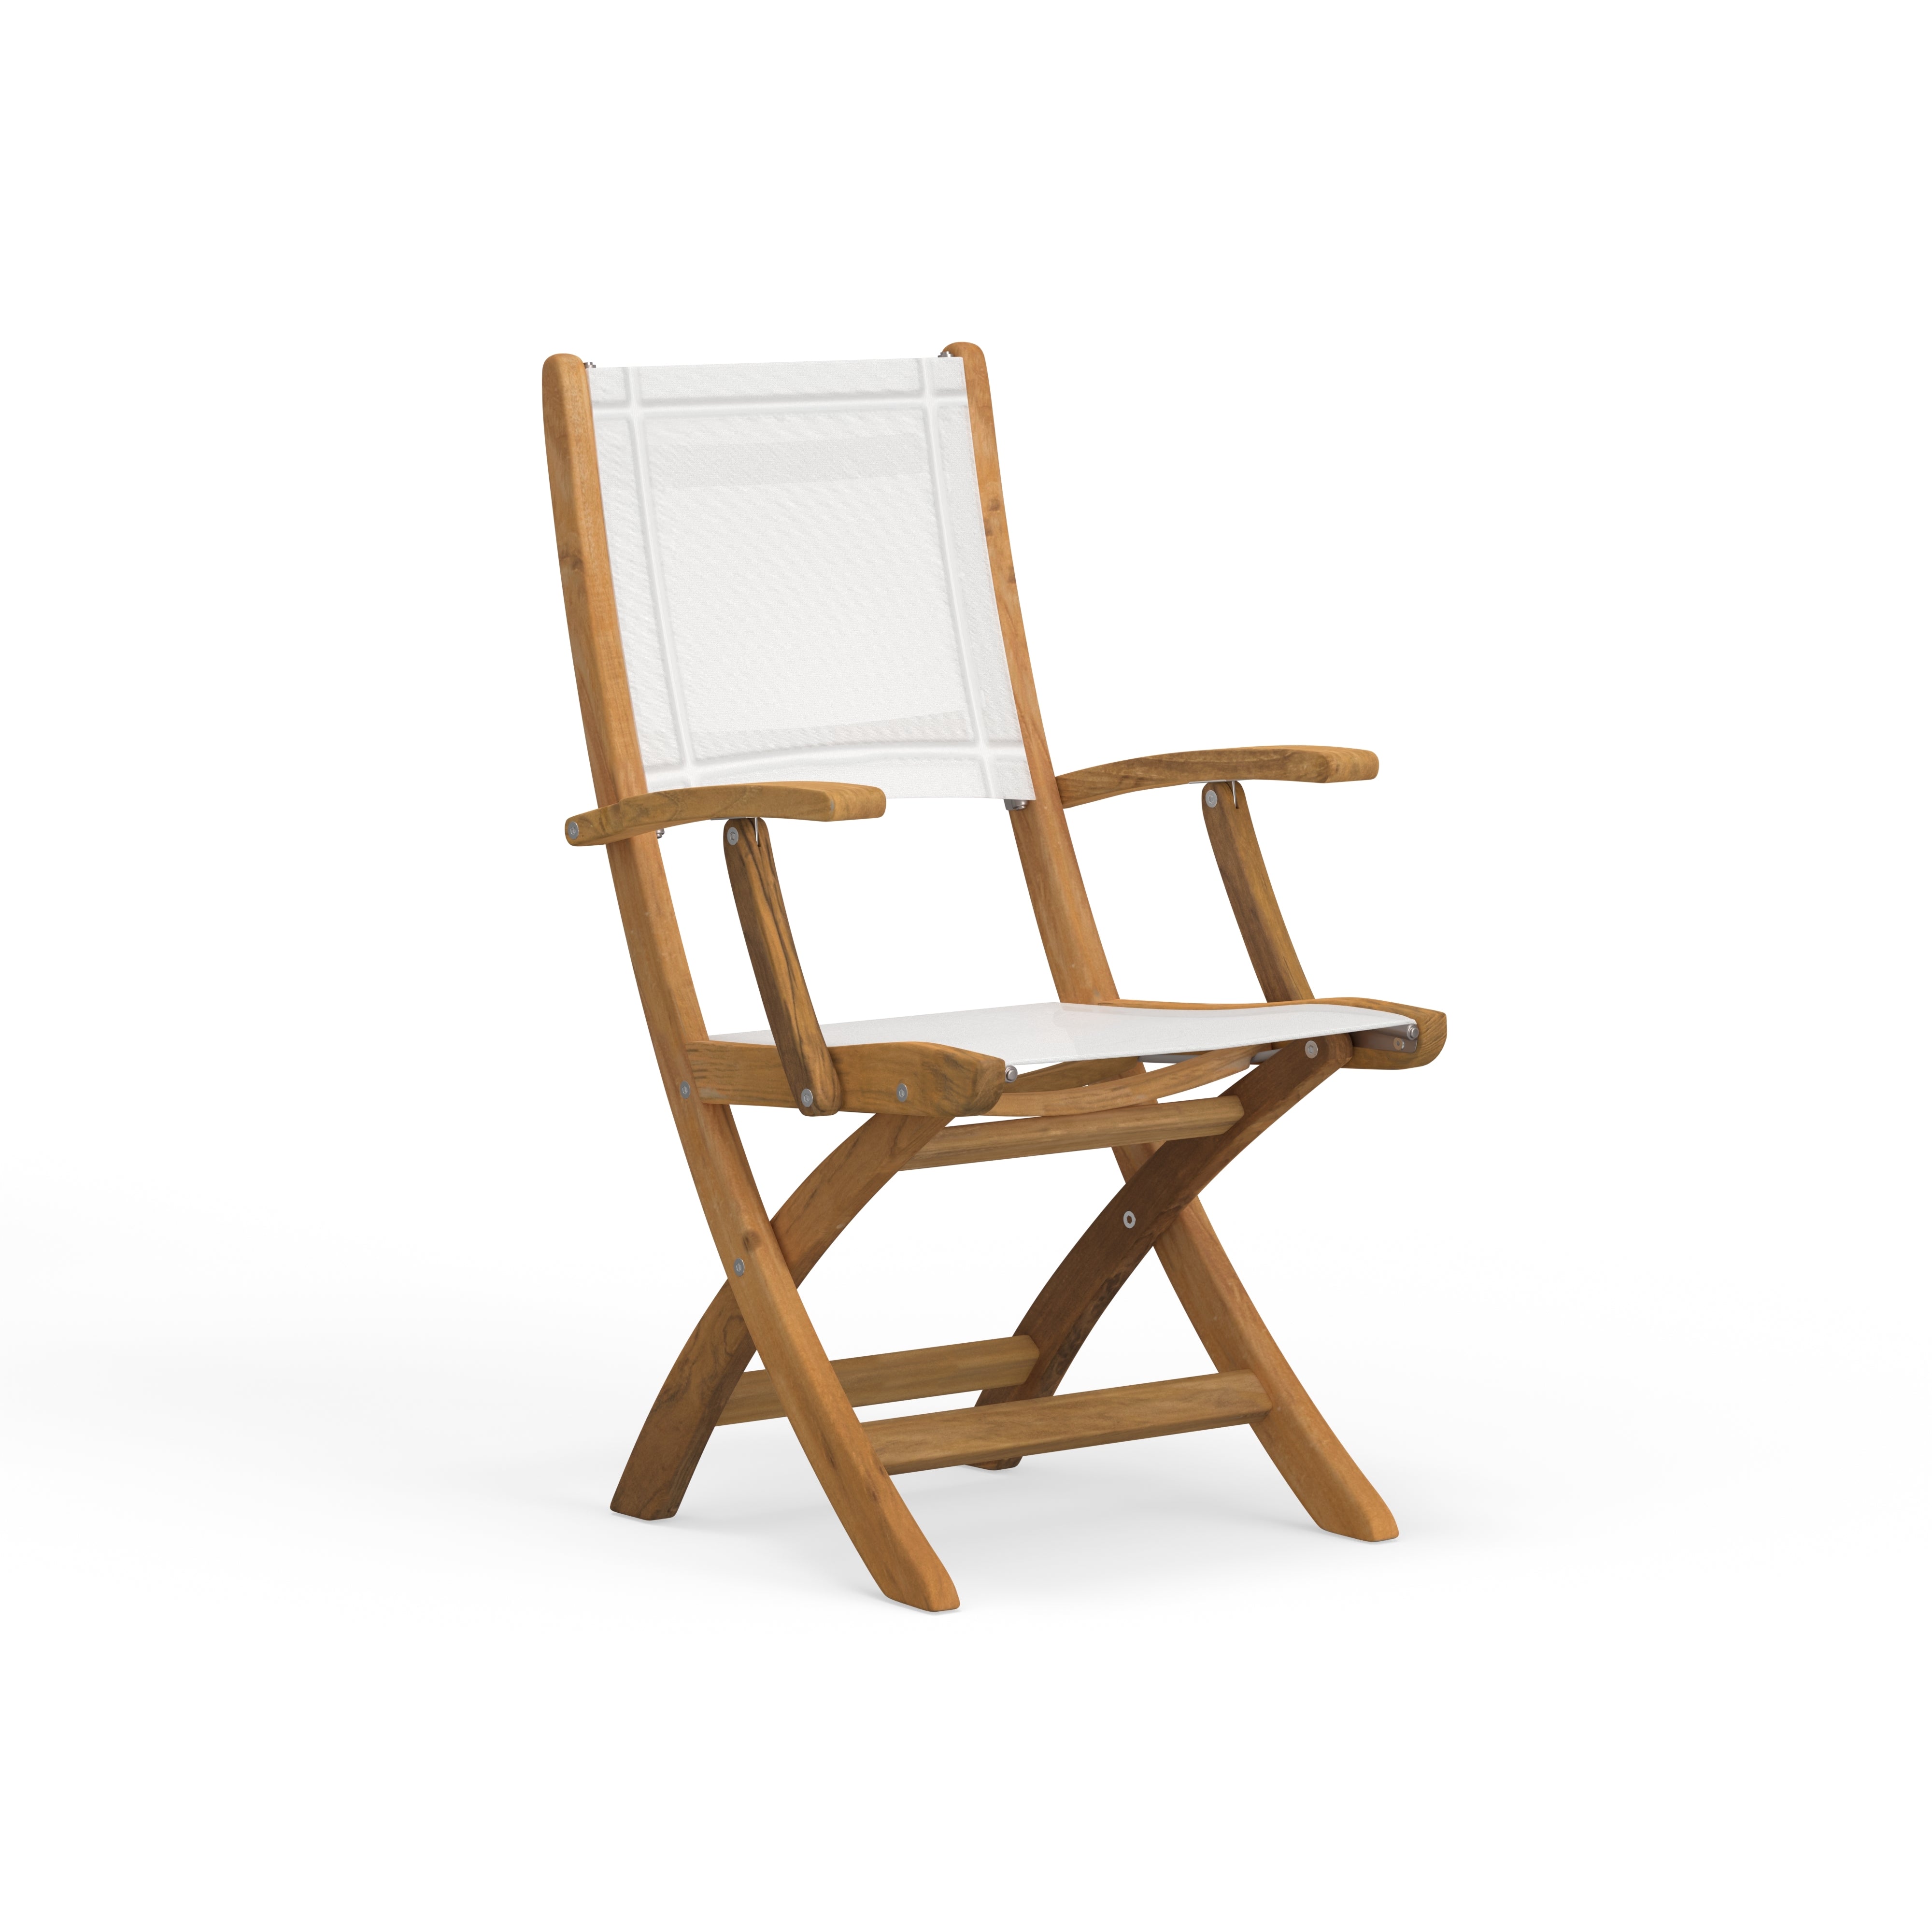 Highest Quality Luxury Folding Teak Chairs For Outdoor